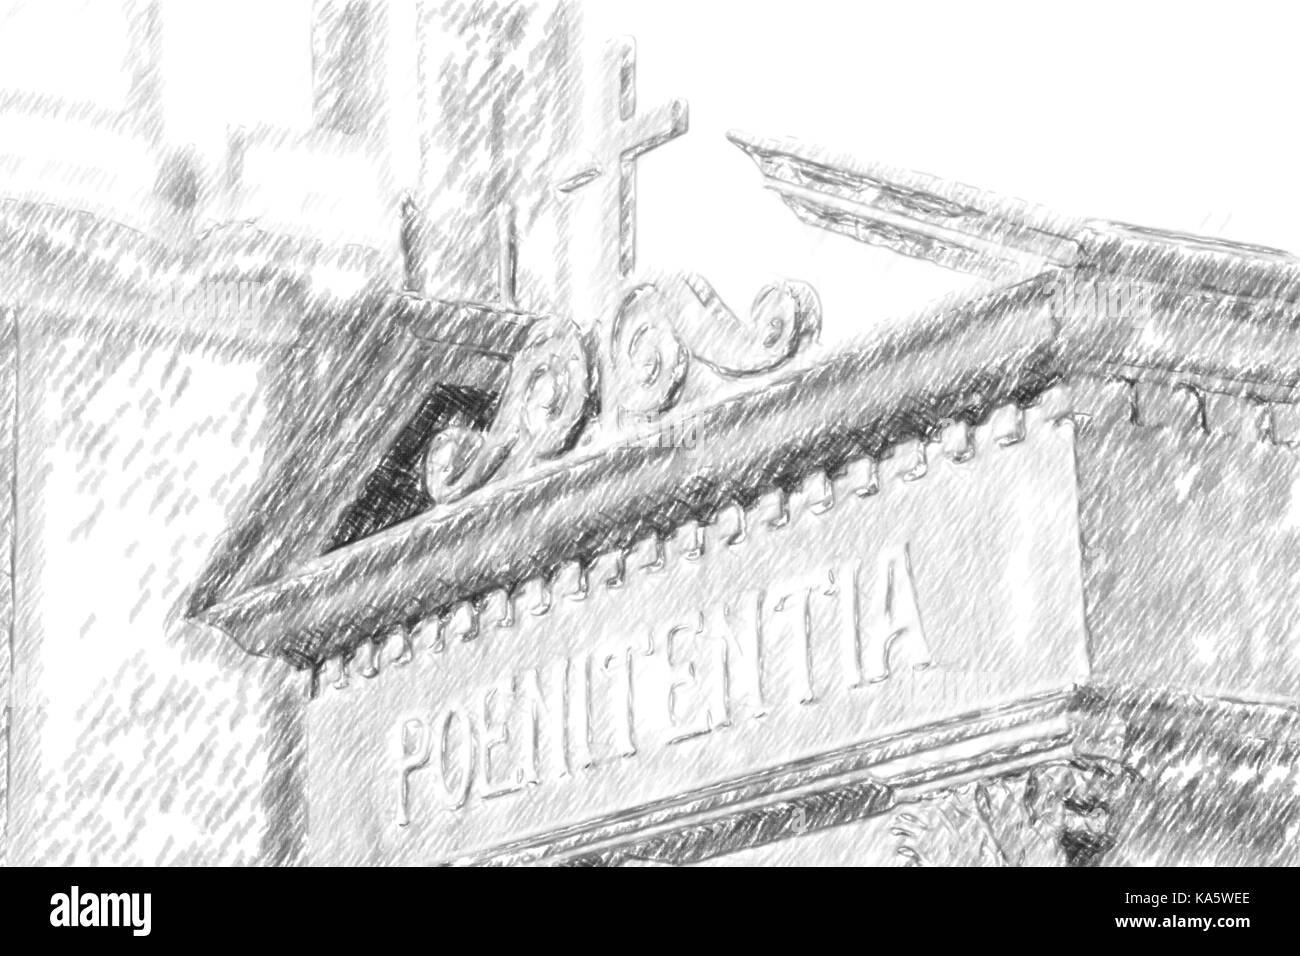 the Latin word poenitentia meaning repentance engraved on a wooden confessional Stock Photo